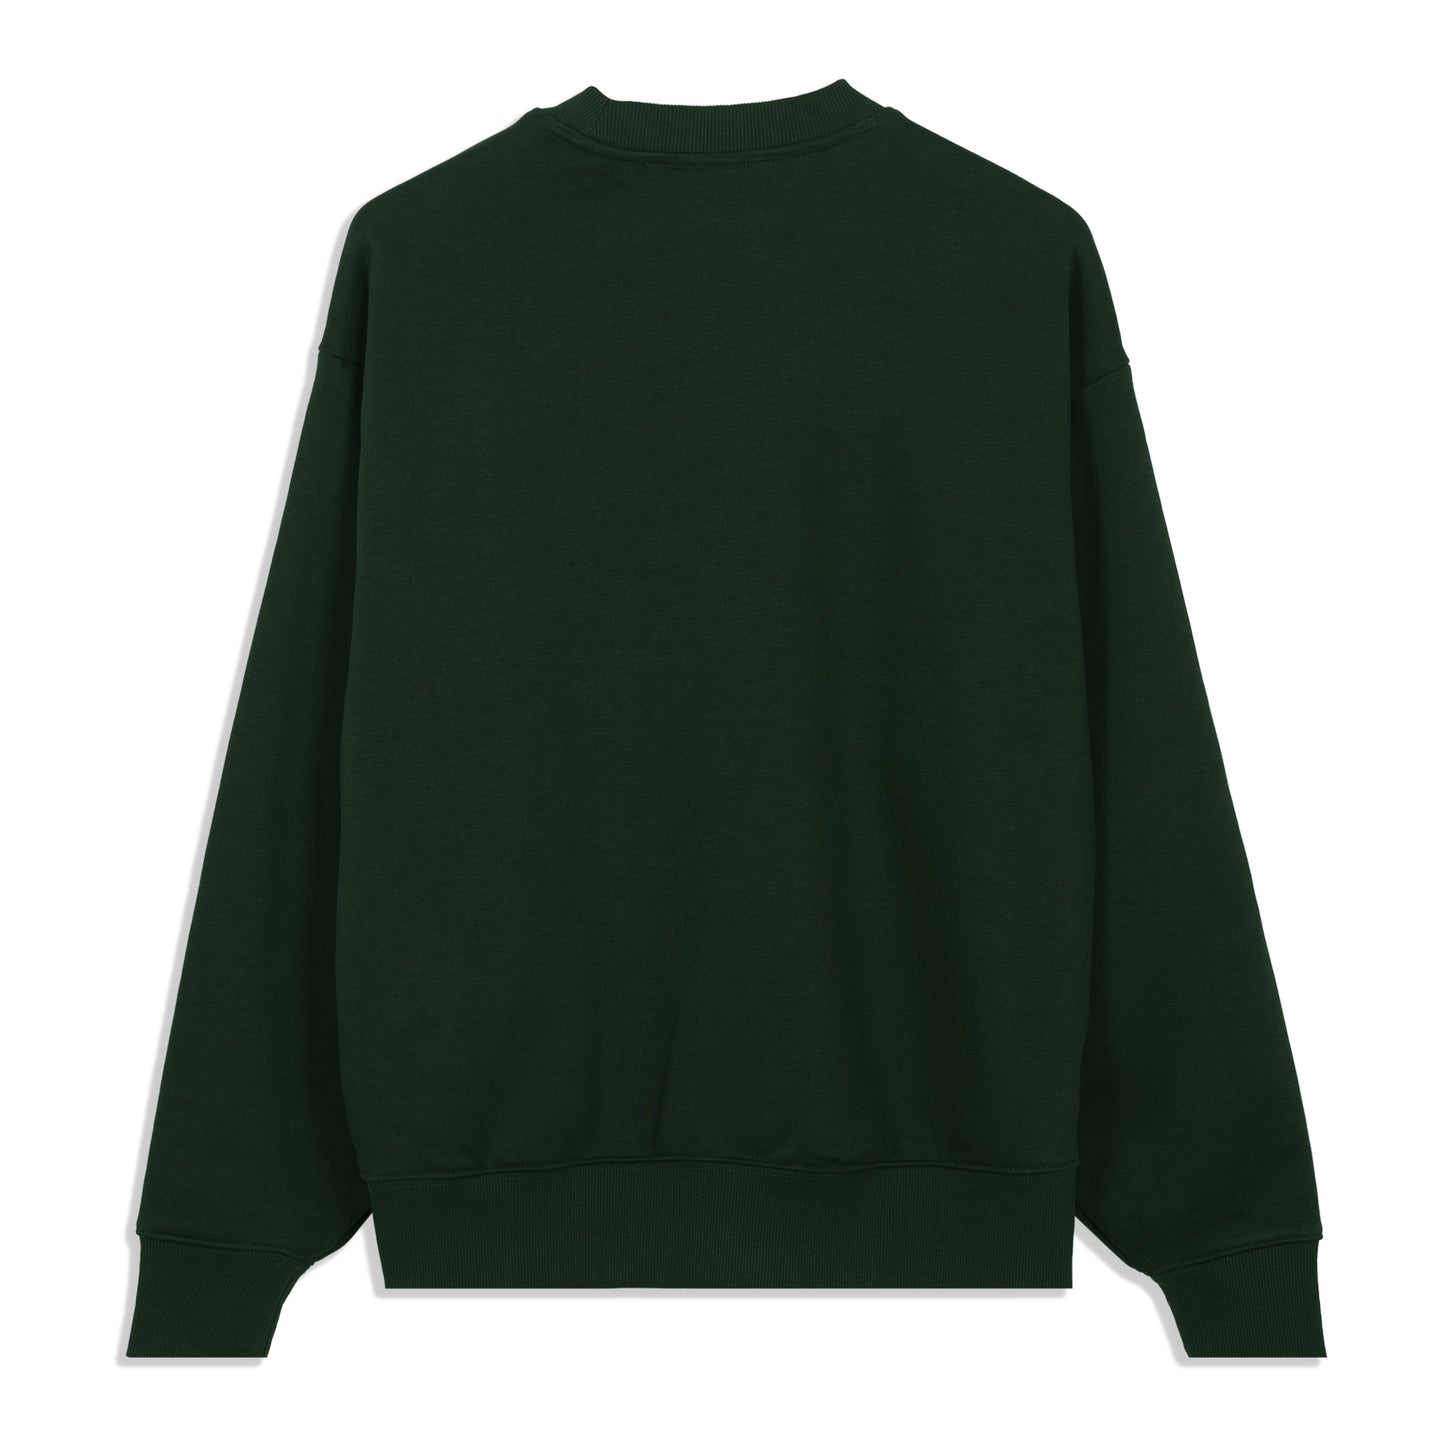 Candice For You - Candance Crewneck - Forest Green